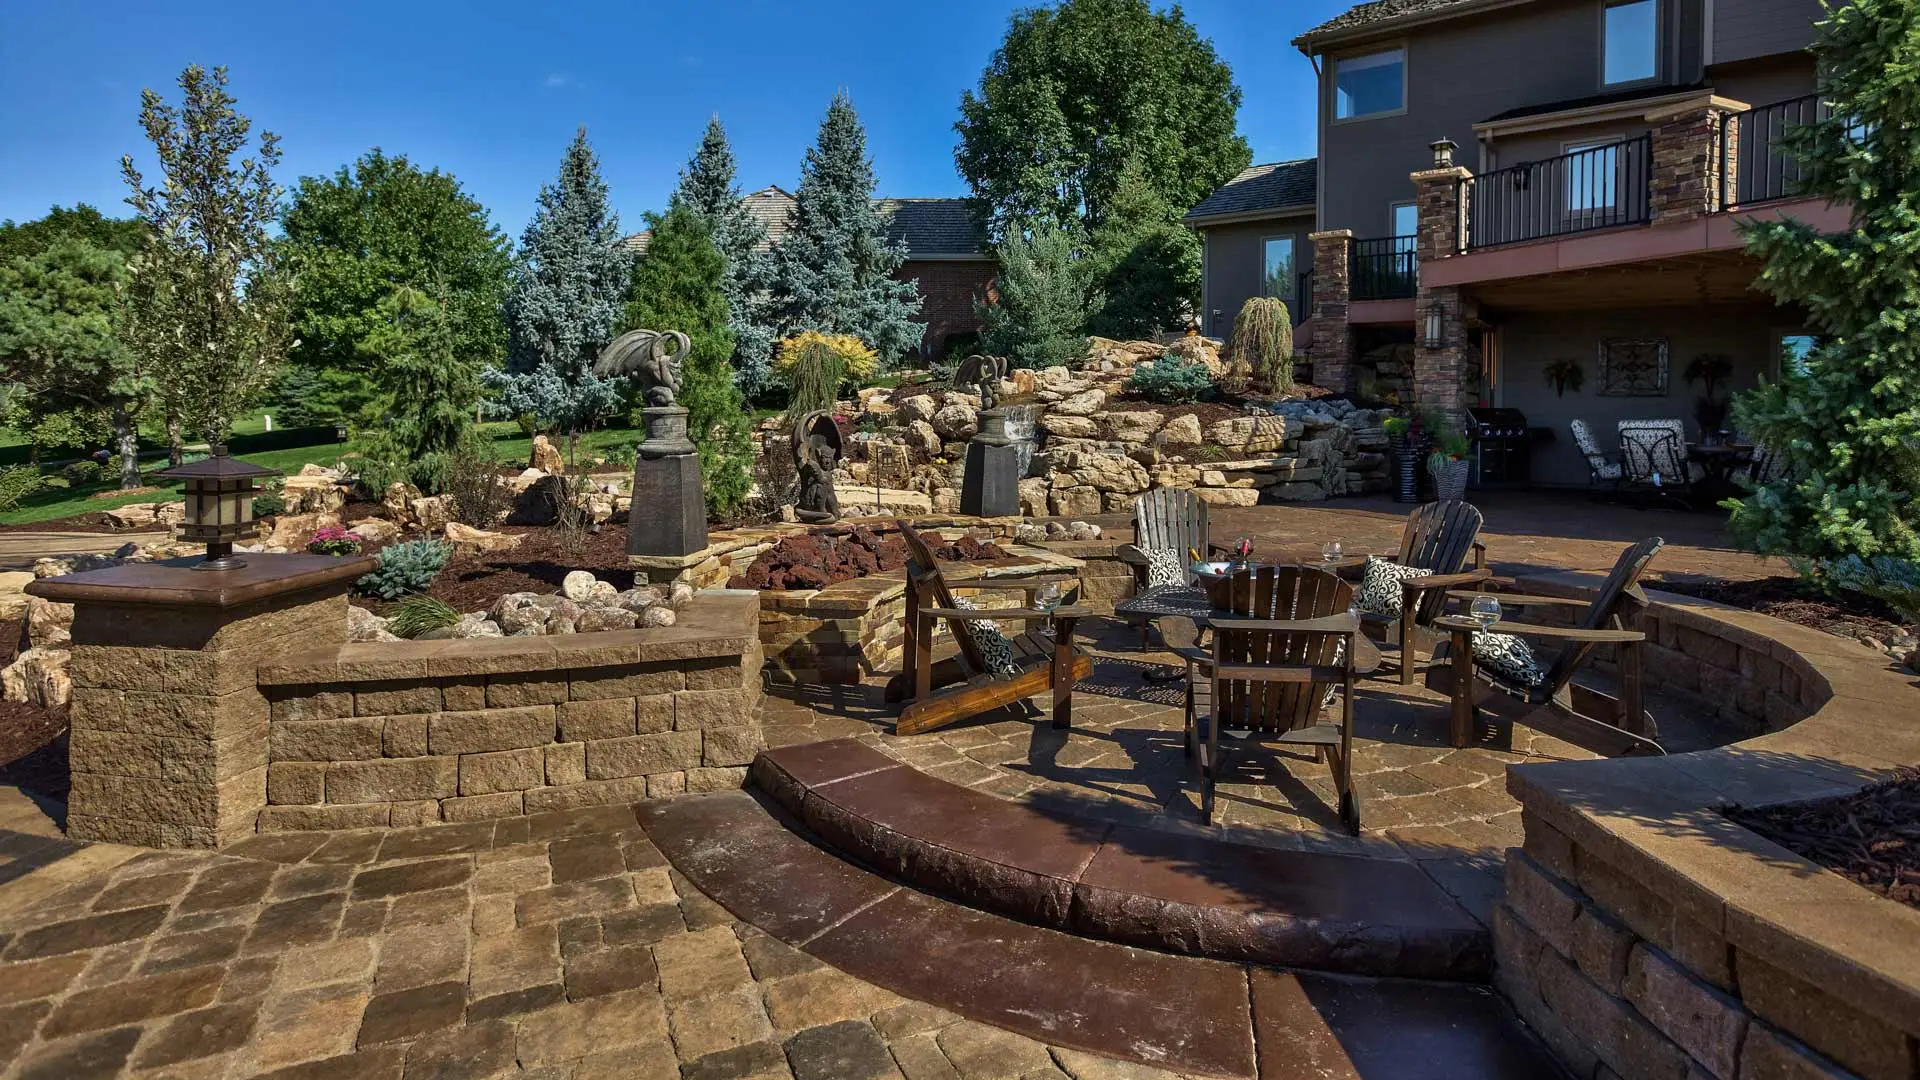 Outdoor living space with seating wall, patio, and stonework in Omaha,  NE.